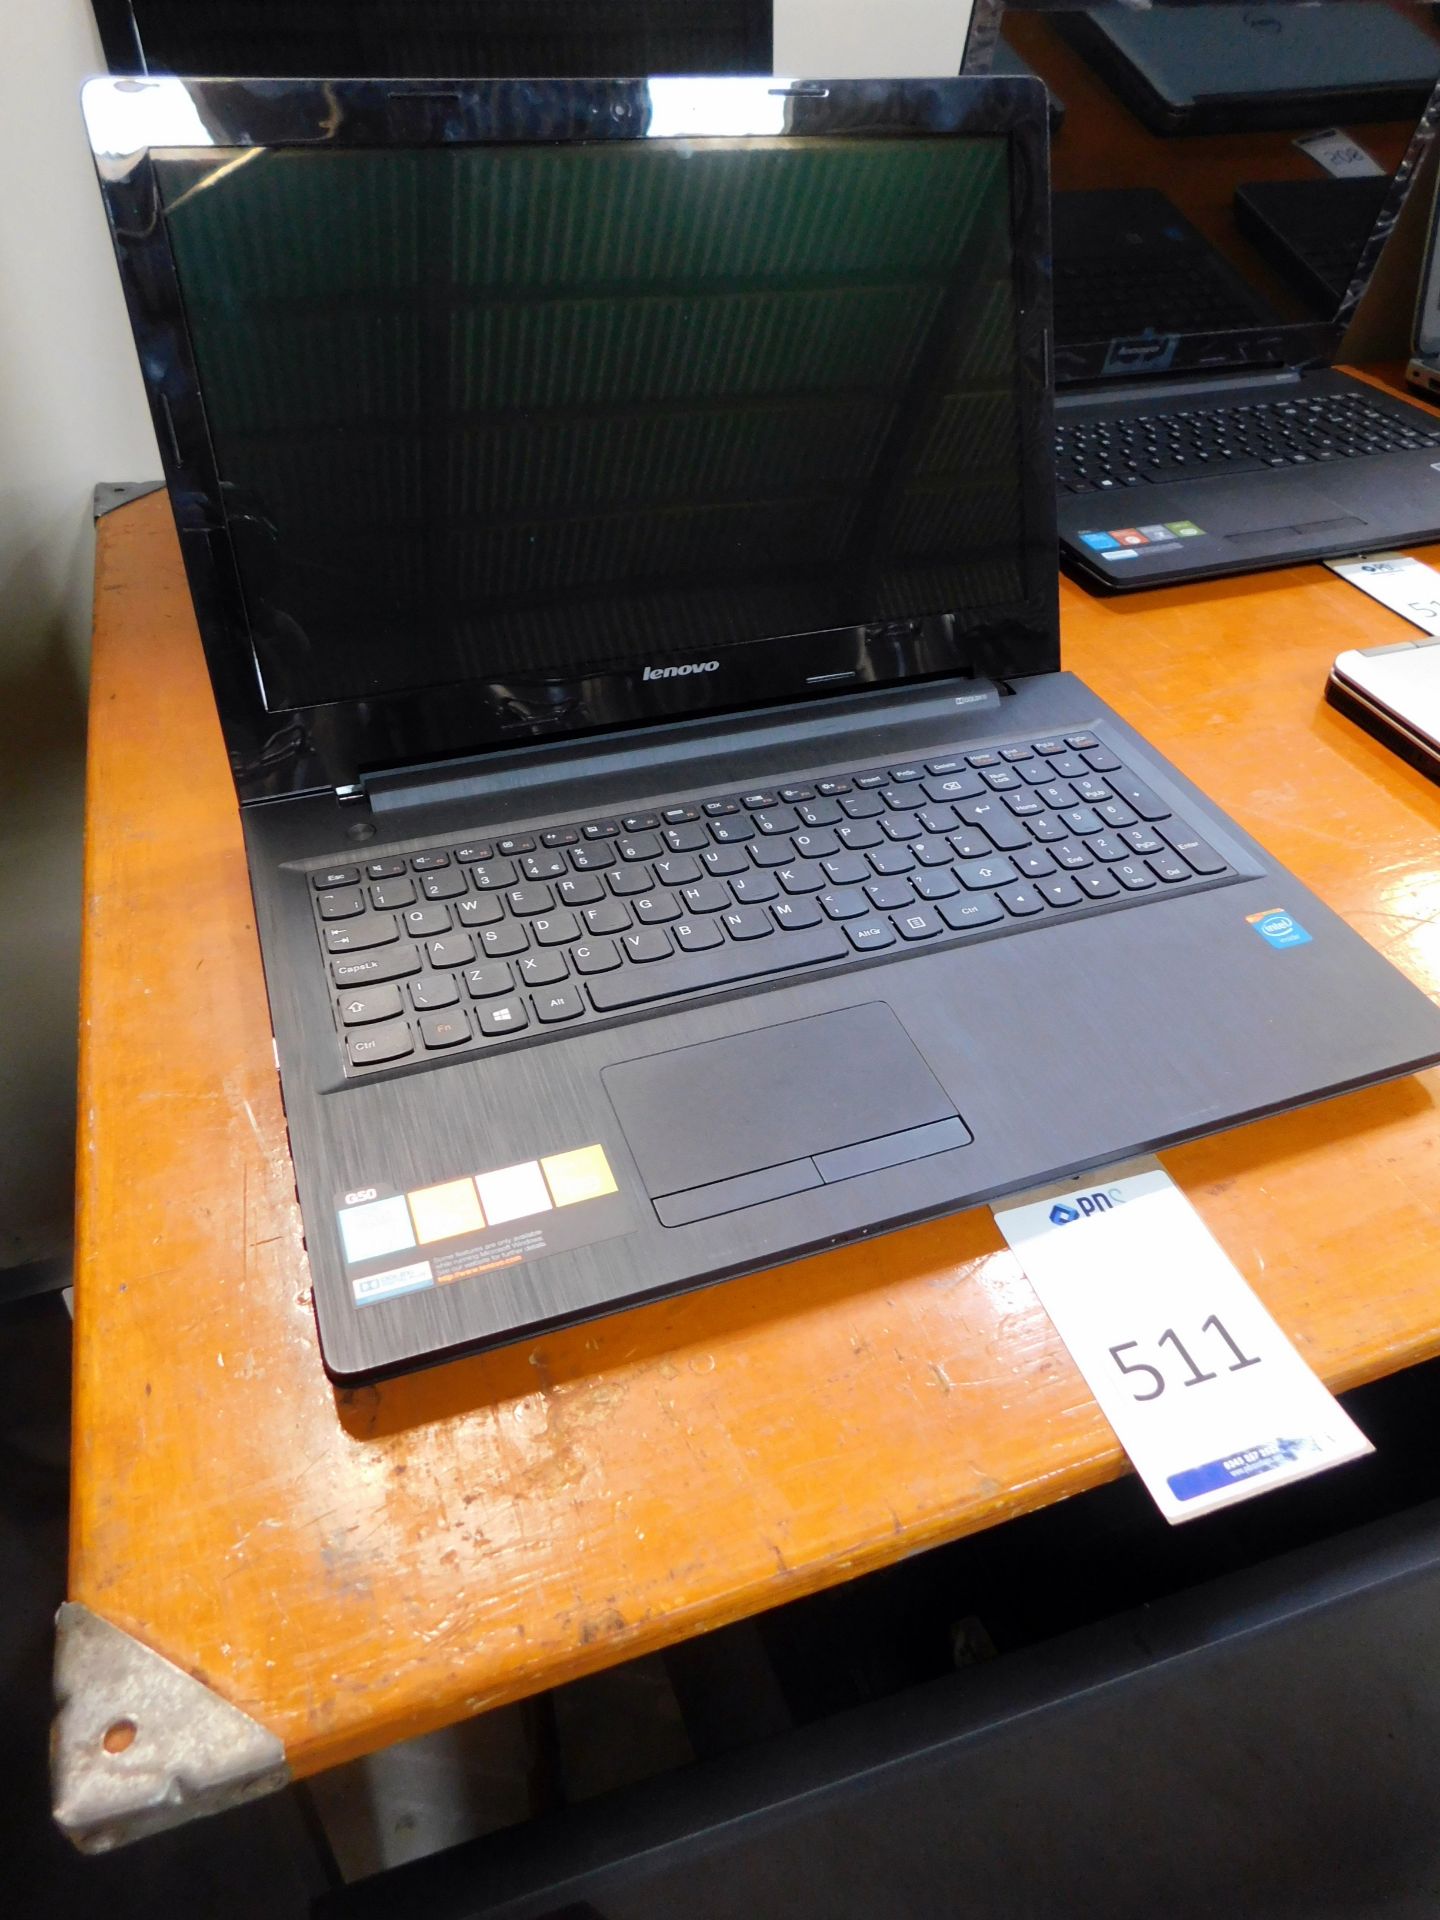 Lenovo G50-30 Laptop (No HDD) (Located Brentwood, See General Notes For More Details)